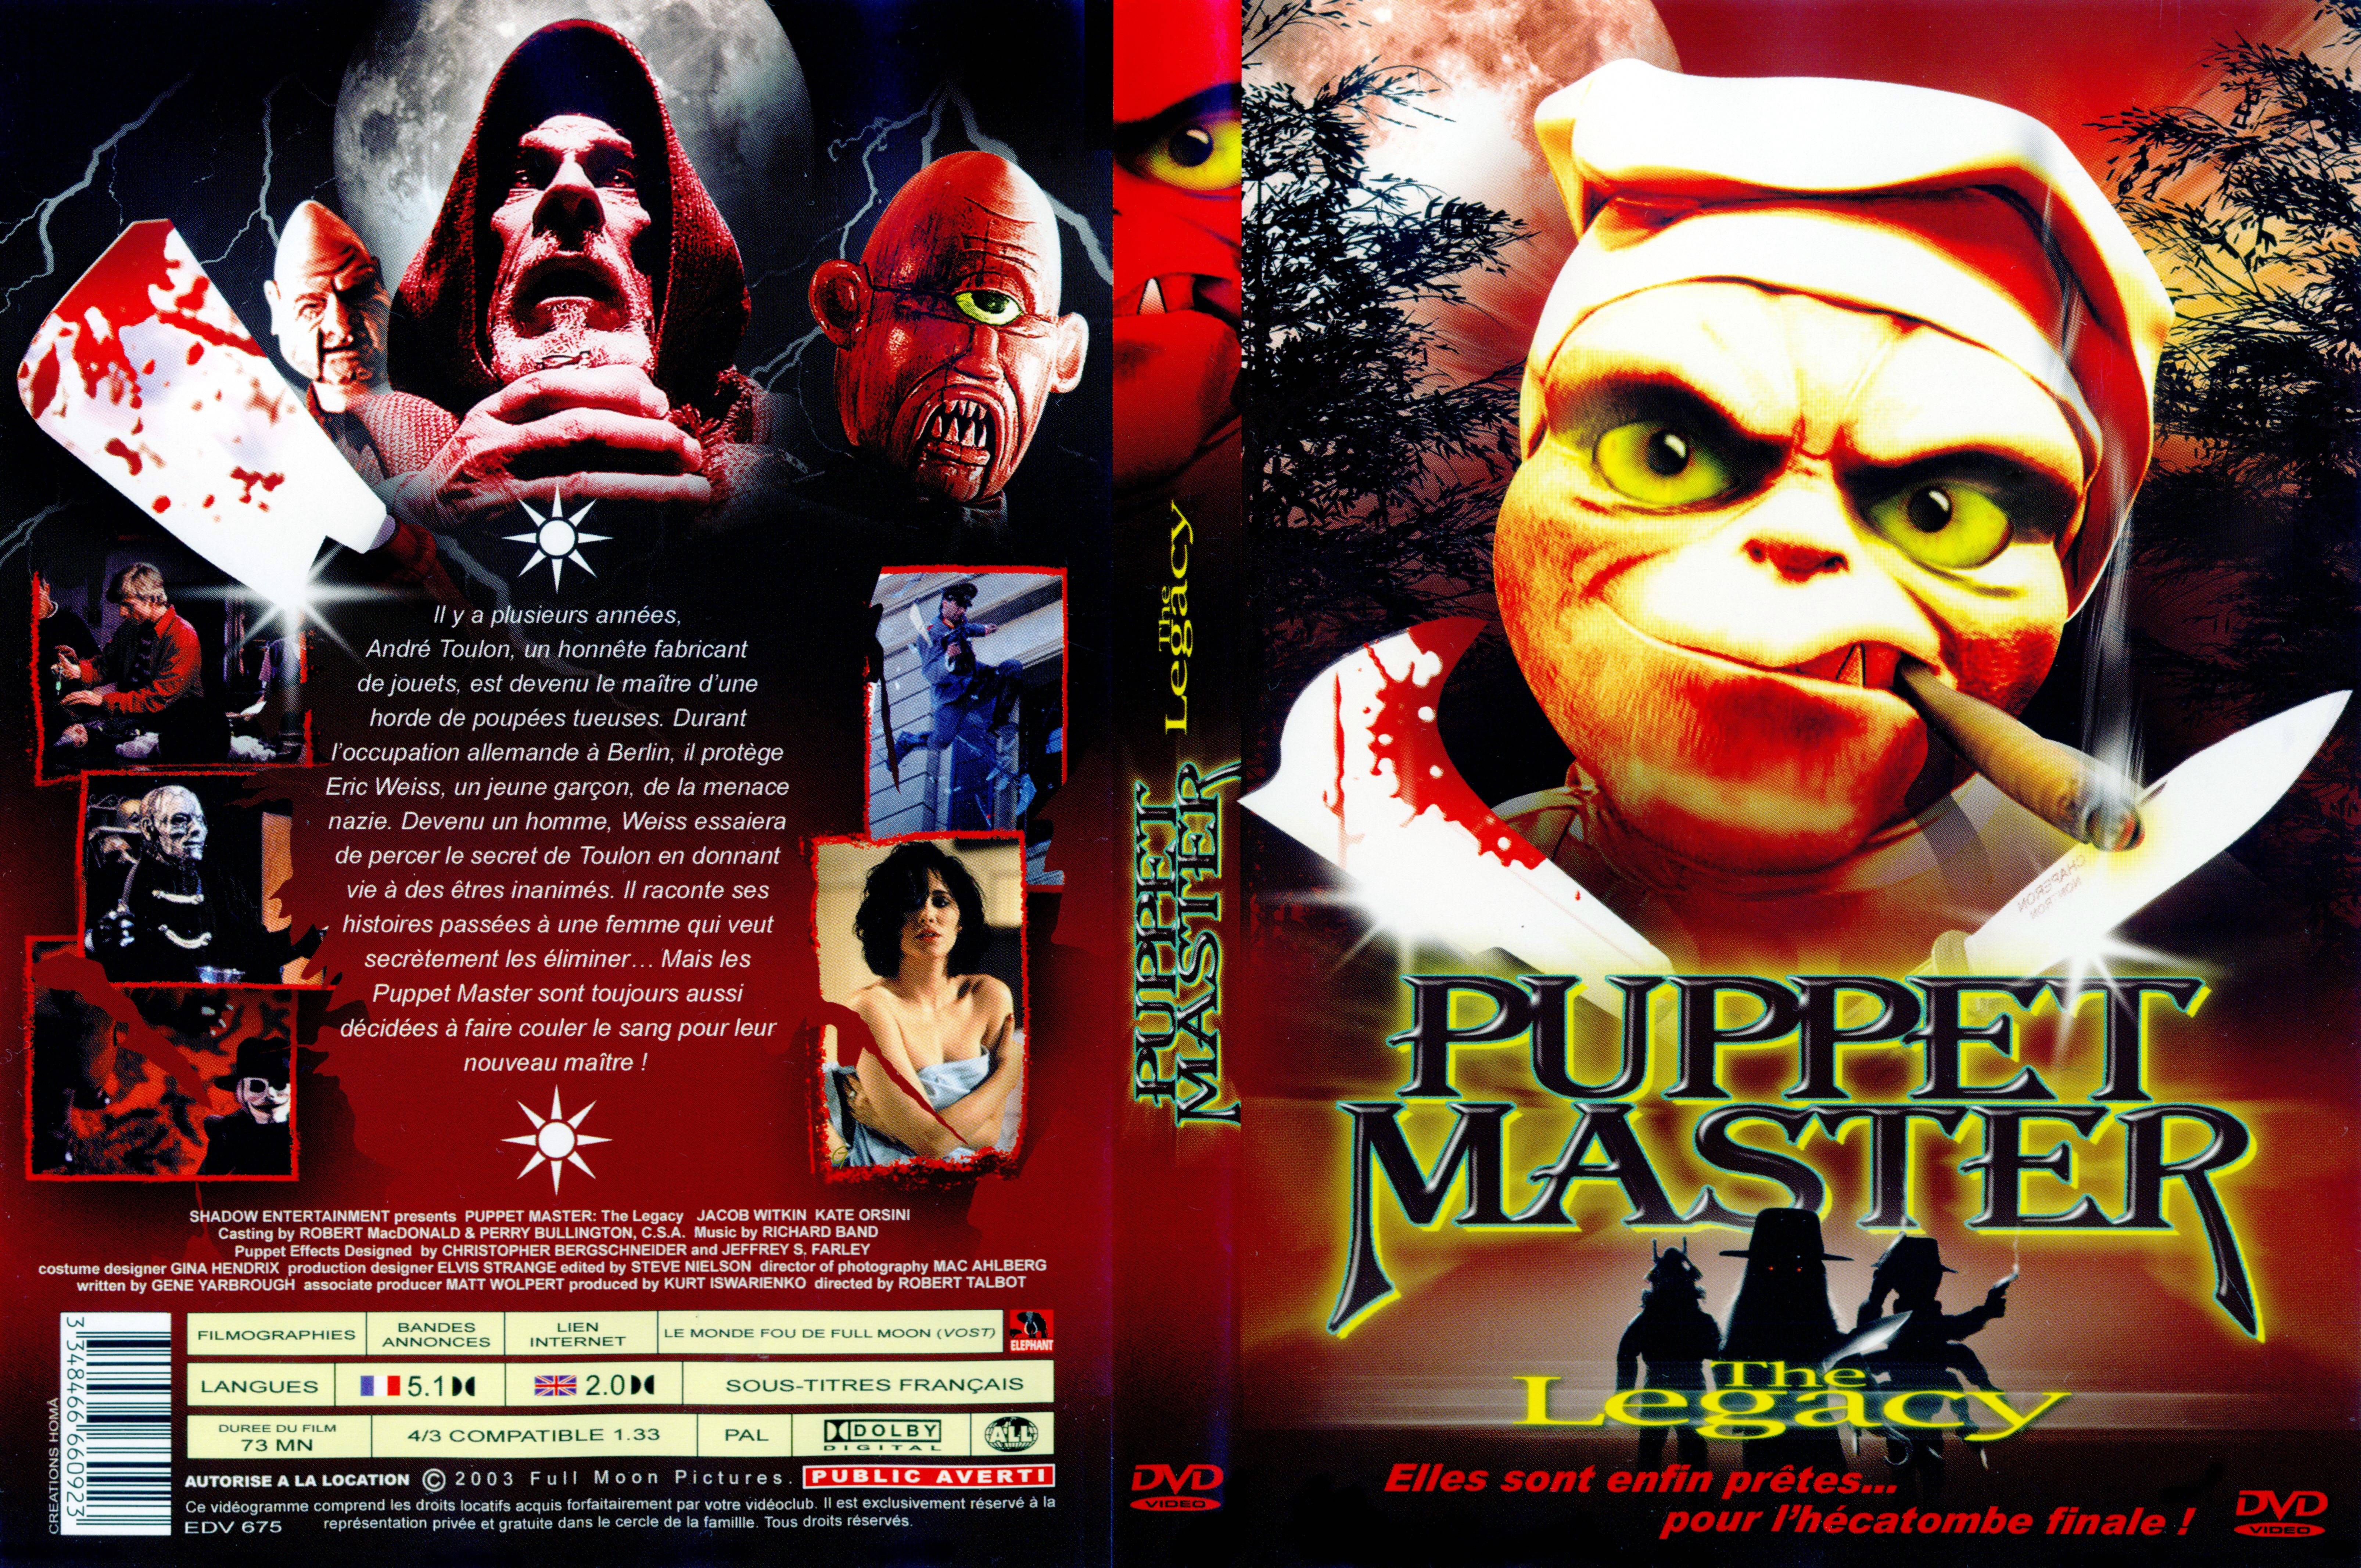 Jaquette DVD Puppet Master The legacy